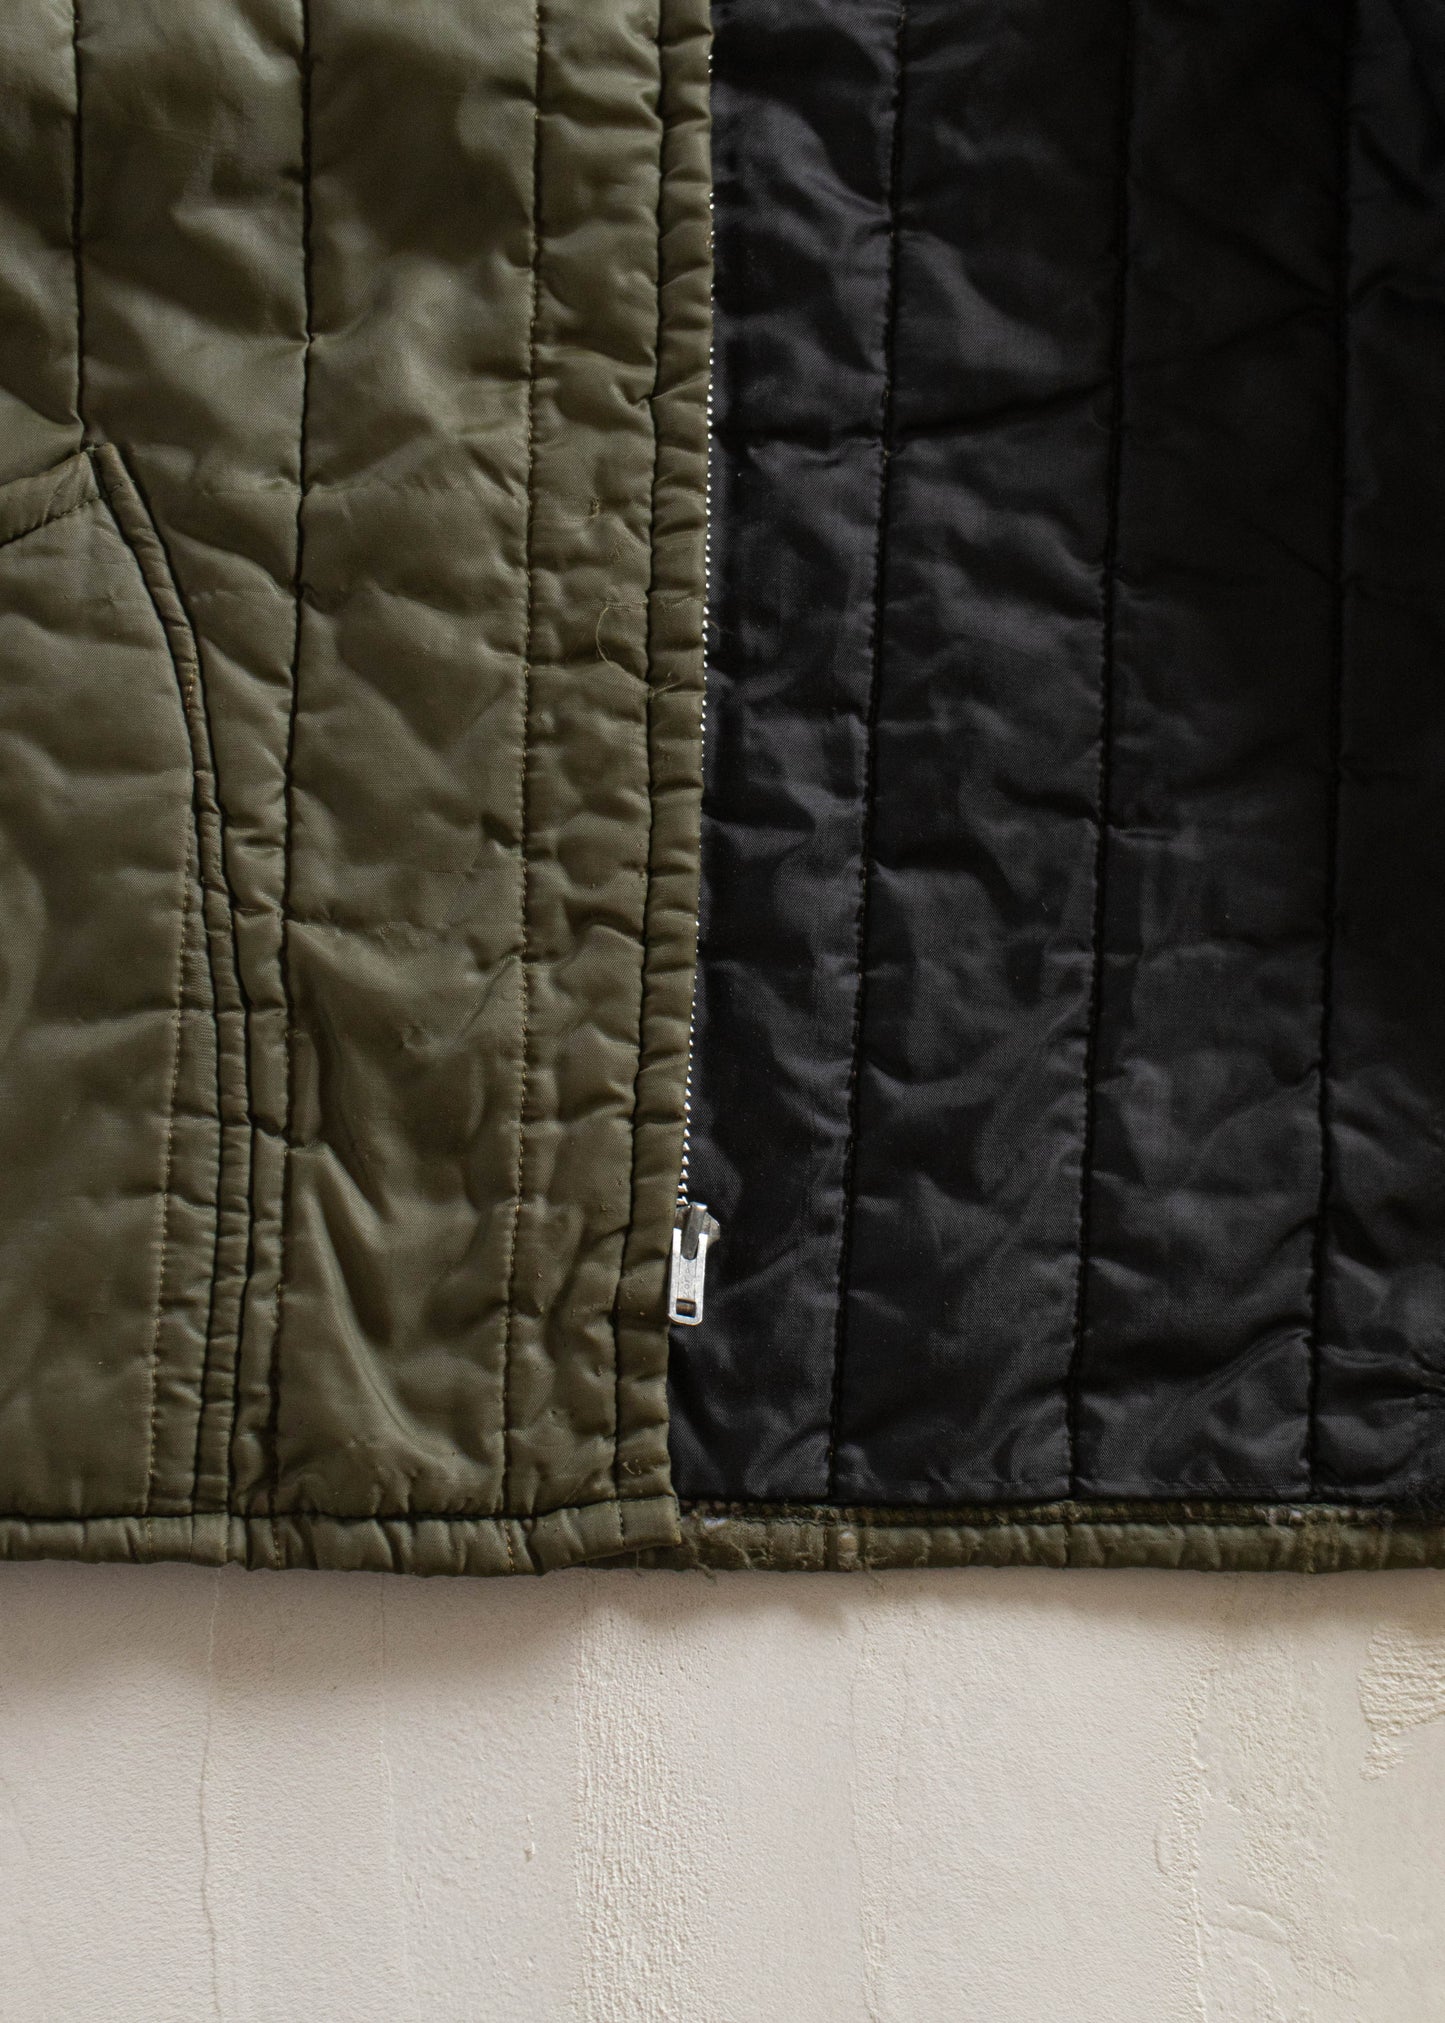 1980s Quilted Nylon Jacket Size M/L